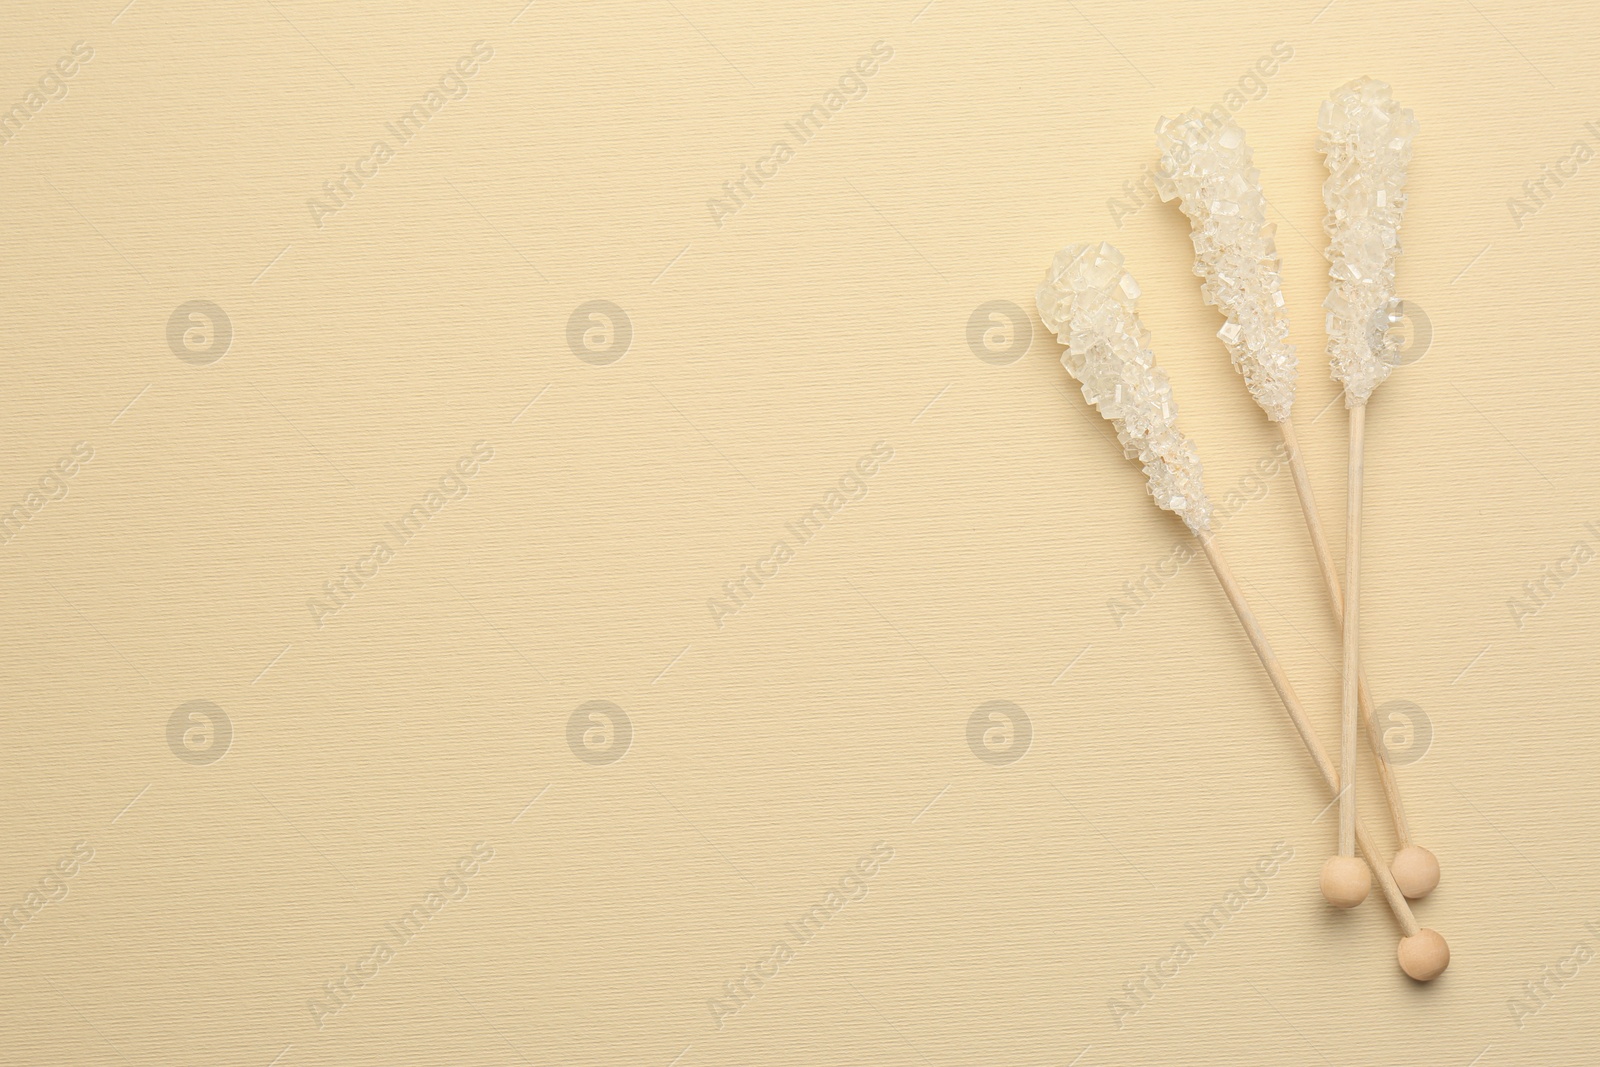 Photo of Wooden sticks with sugar crystals and space for text on beige background, flat lay. Tasty rock candies